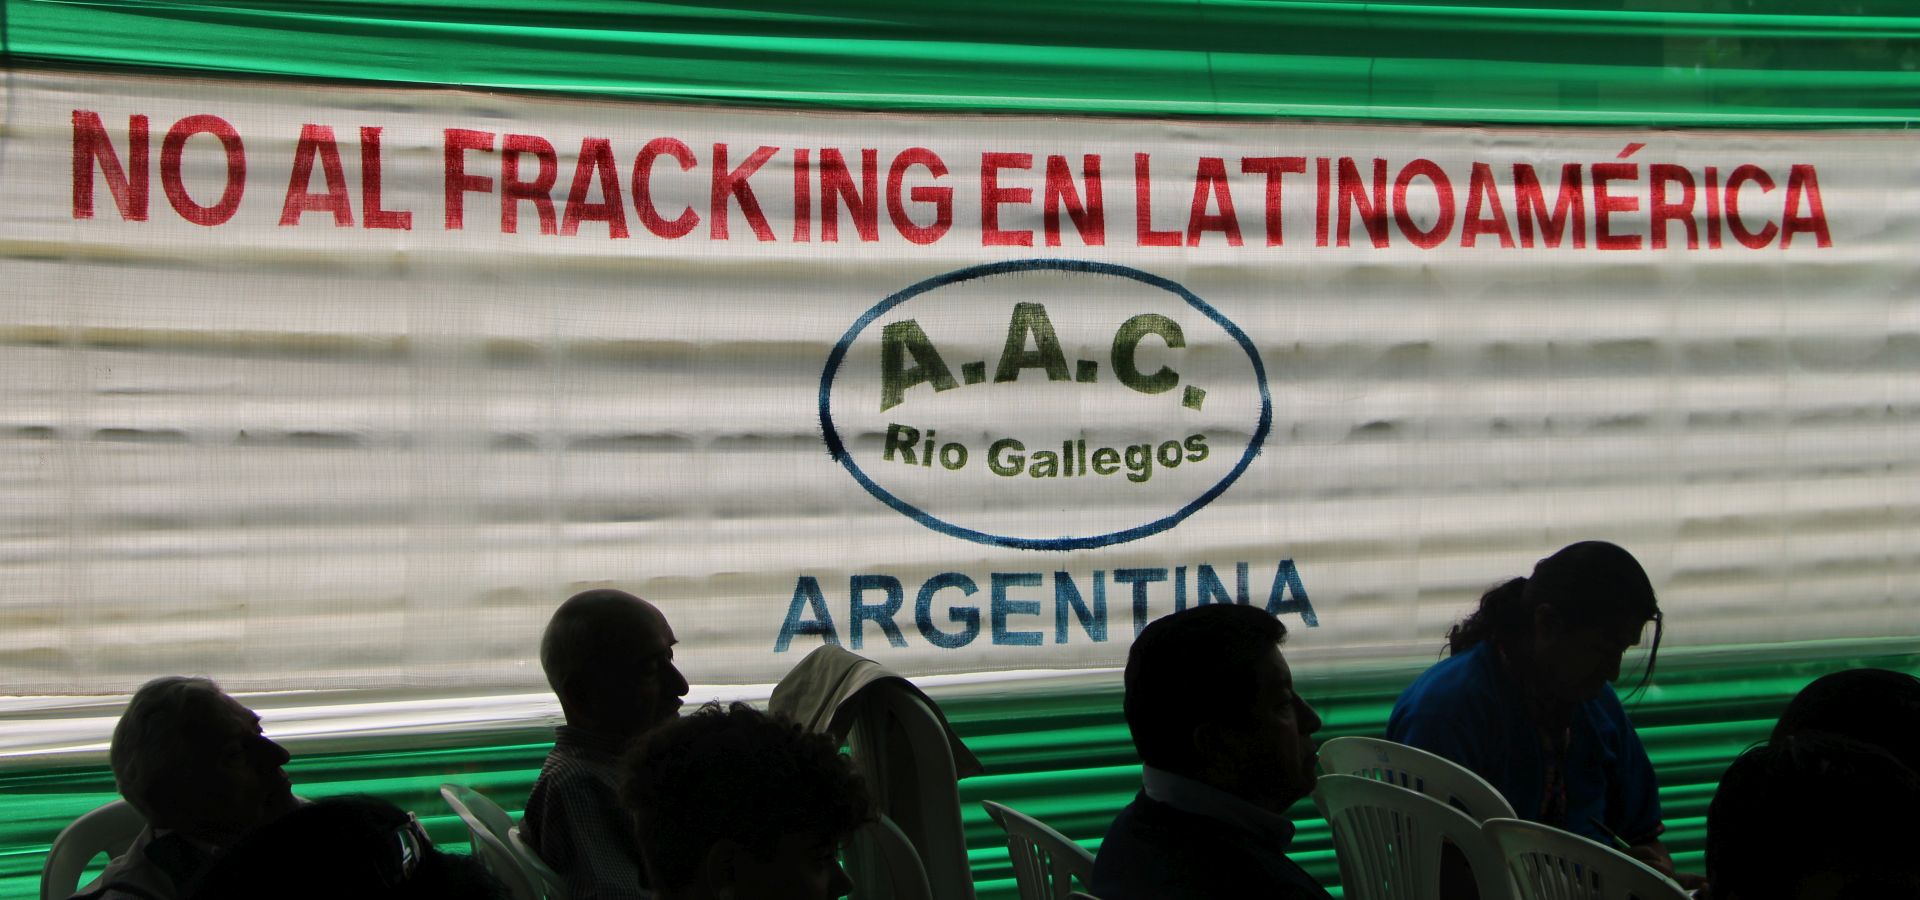 Silhouttes of people sitting in rows in the foreground, in the background a banner with a statement against fracking. 